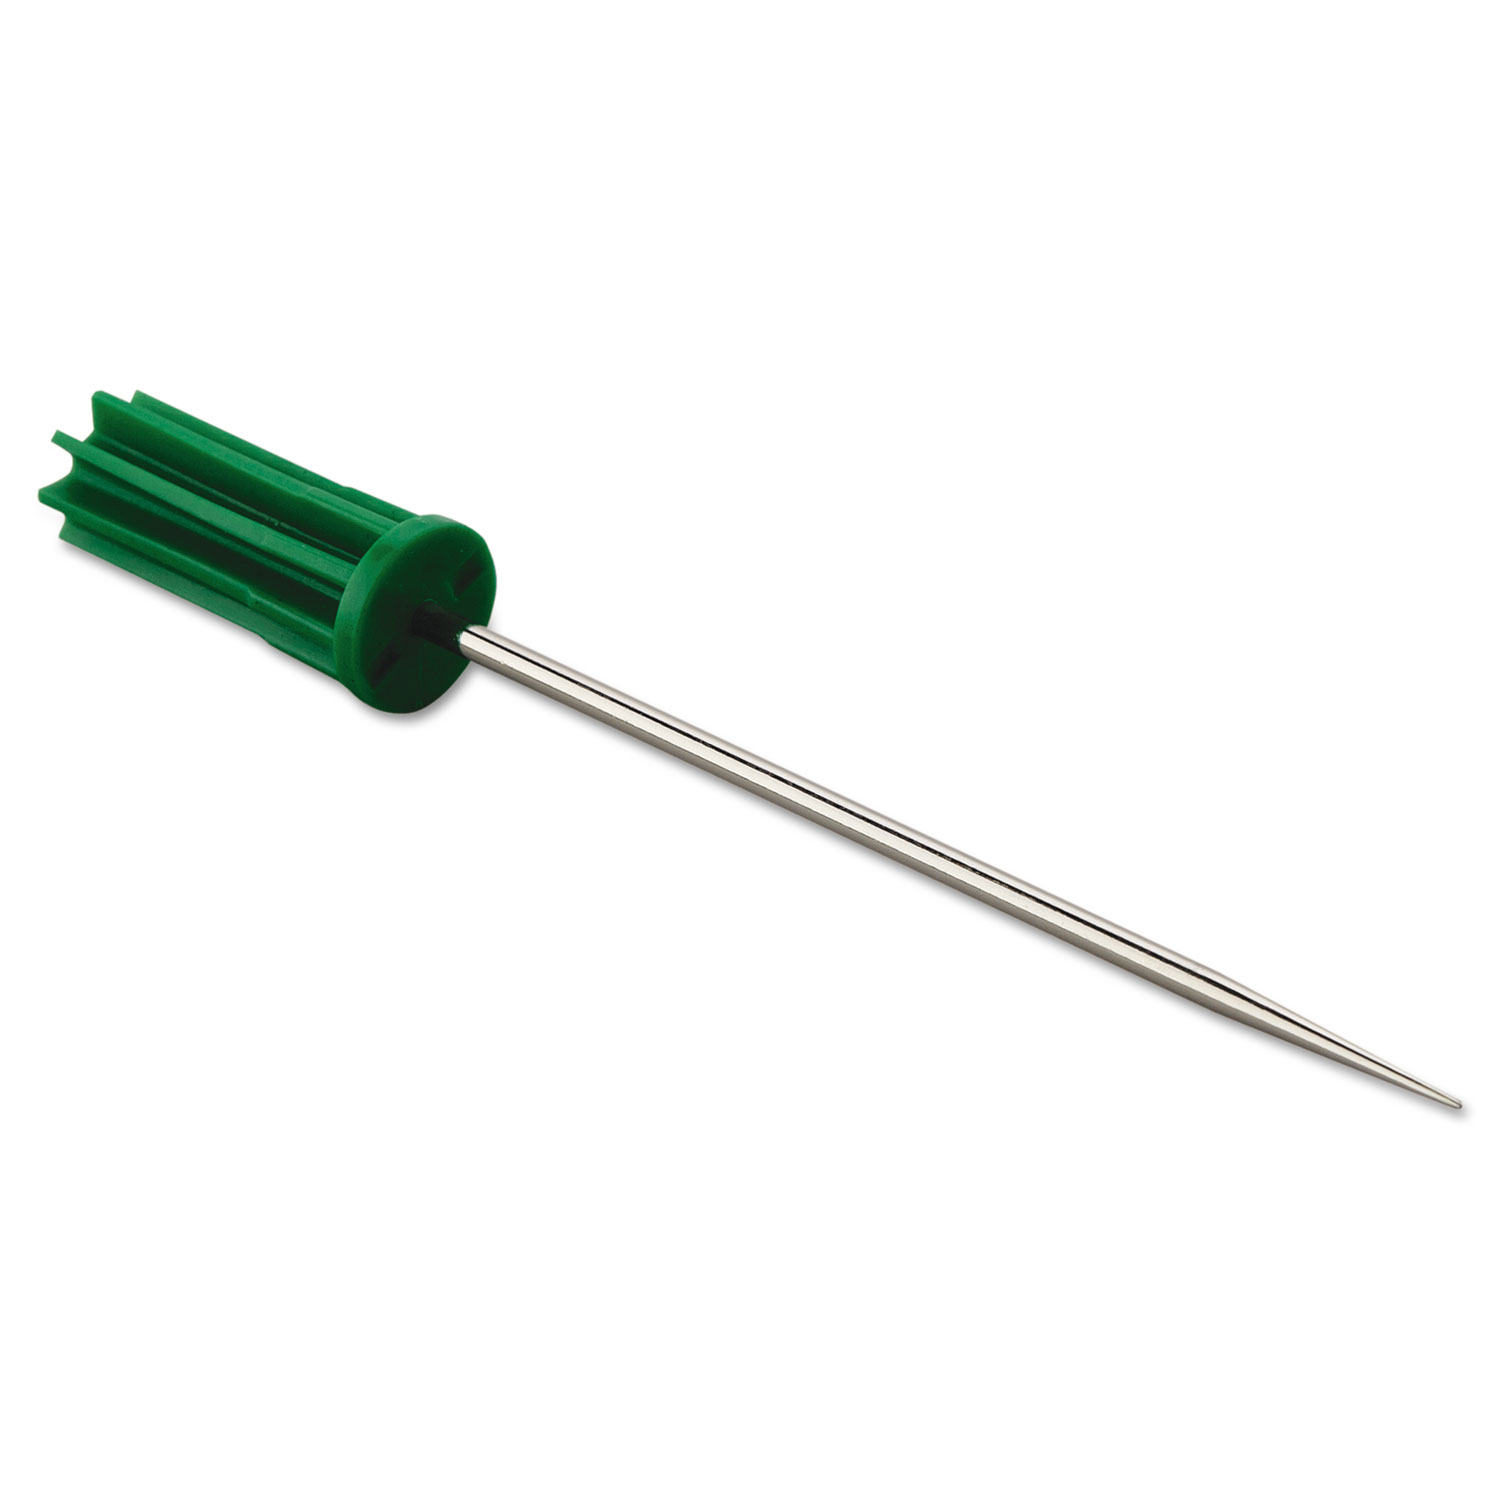  Unger PINP0 People's PaperPicker Replacement Pin Plugs, 4, Stainless Steel/Green (UNGPINP) 